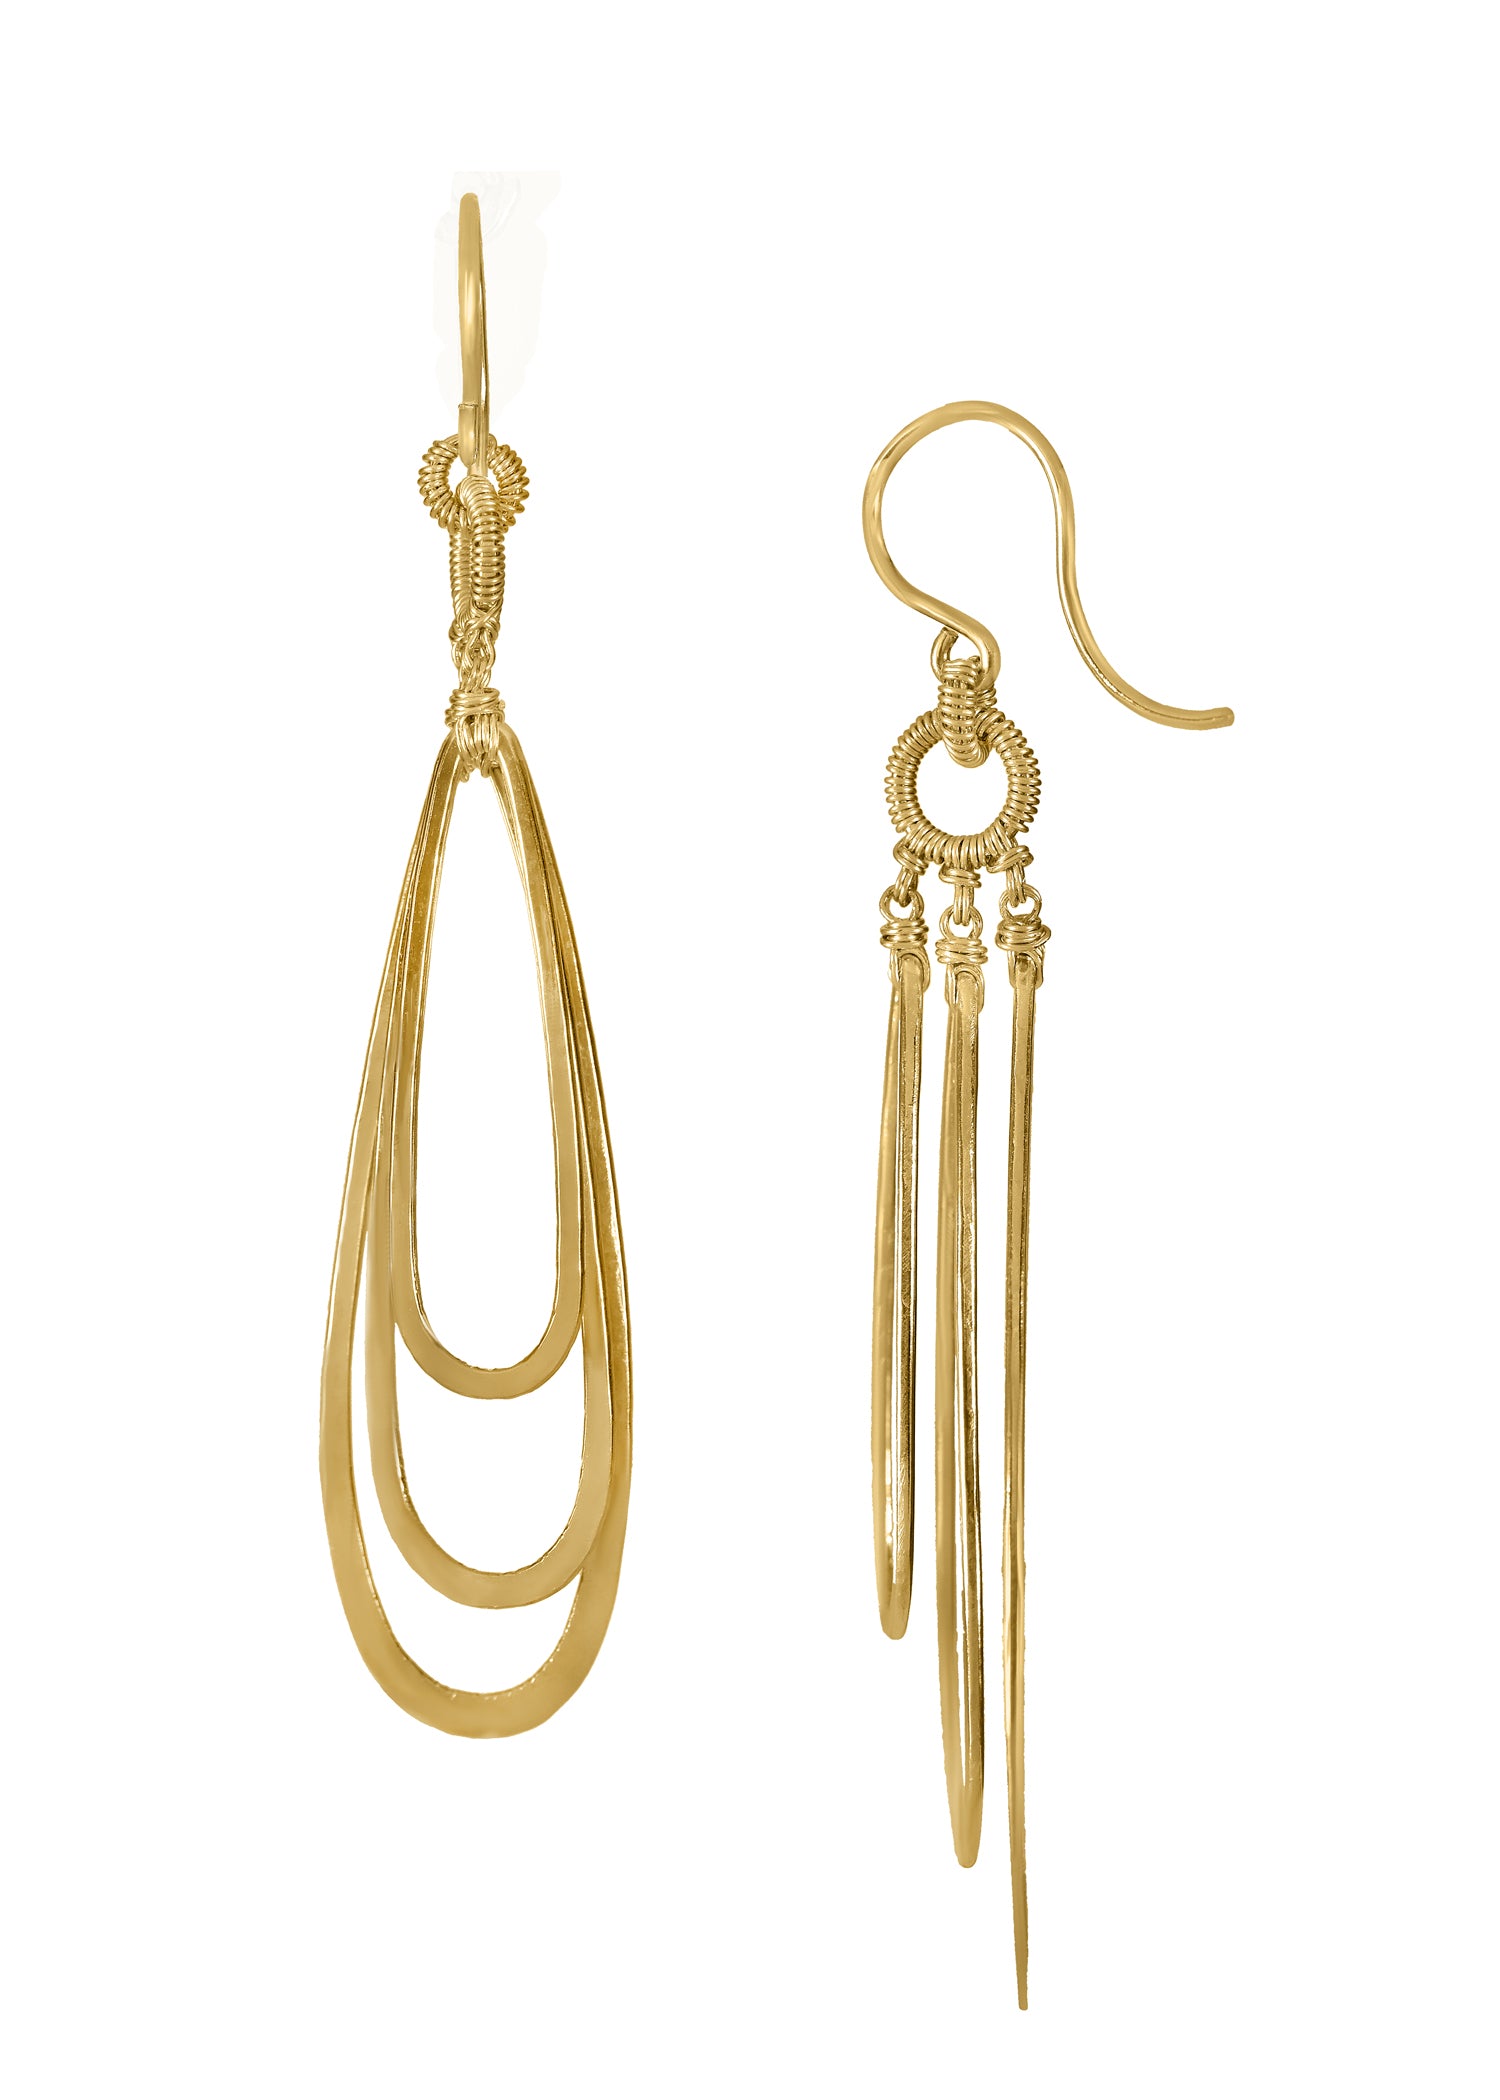 14k gold fill Earrings measure 2-1/2" in length (including the ear wires) and 1/2" in width at the widest point Handmade in our Los Angeles studio